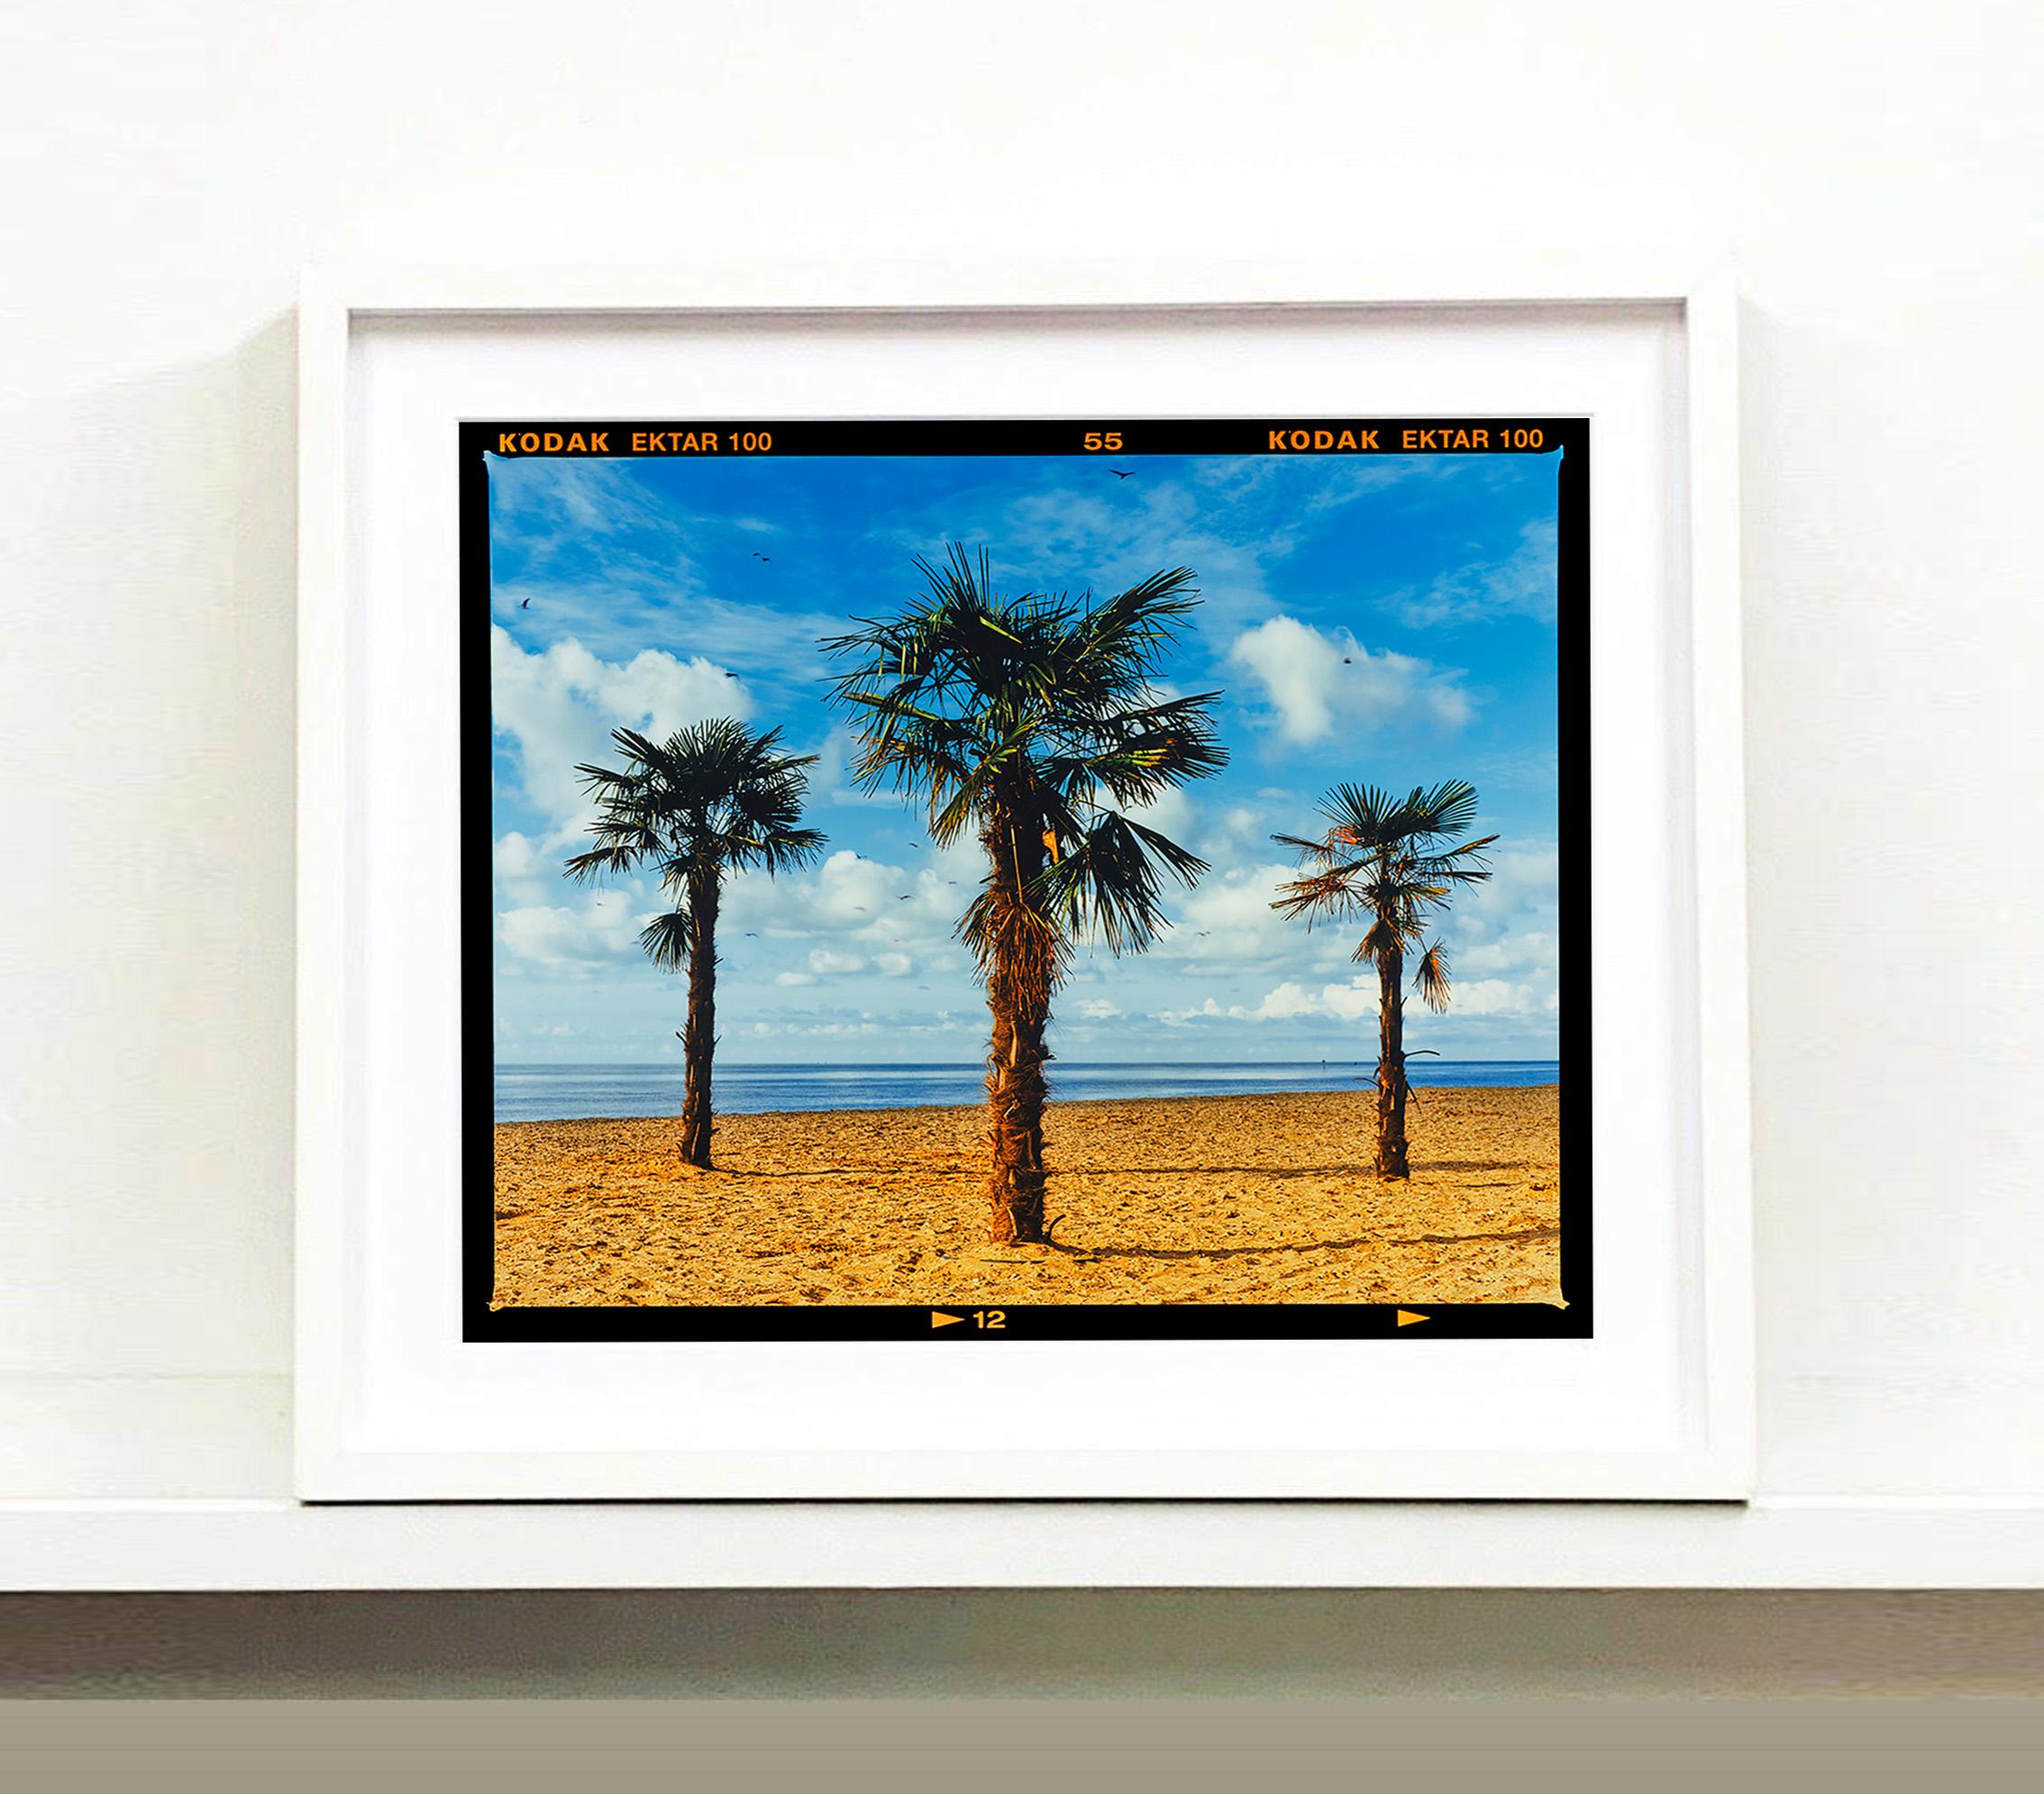 'Three Palms' from Richard Heeps Great British staycation series, On-Sea. Taken in Clacton-on-Sea, Richard was channeling Hitchcock in his mind. He printed in his darkroom full frame with the Kodak film rebate which adds another dimension to this